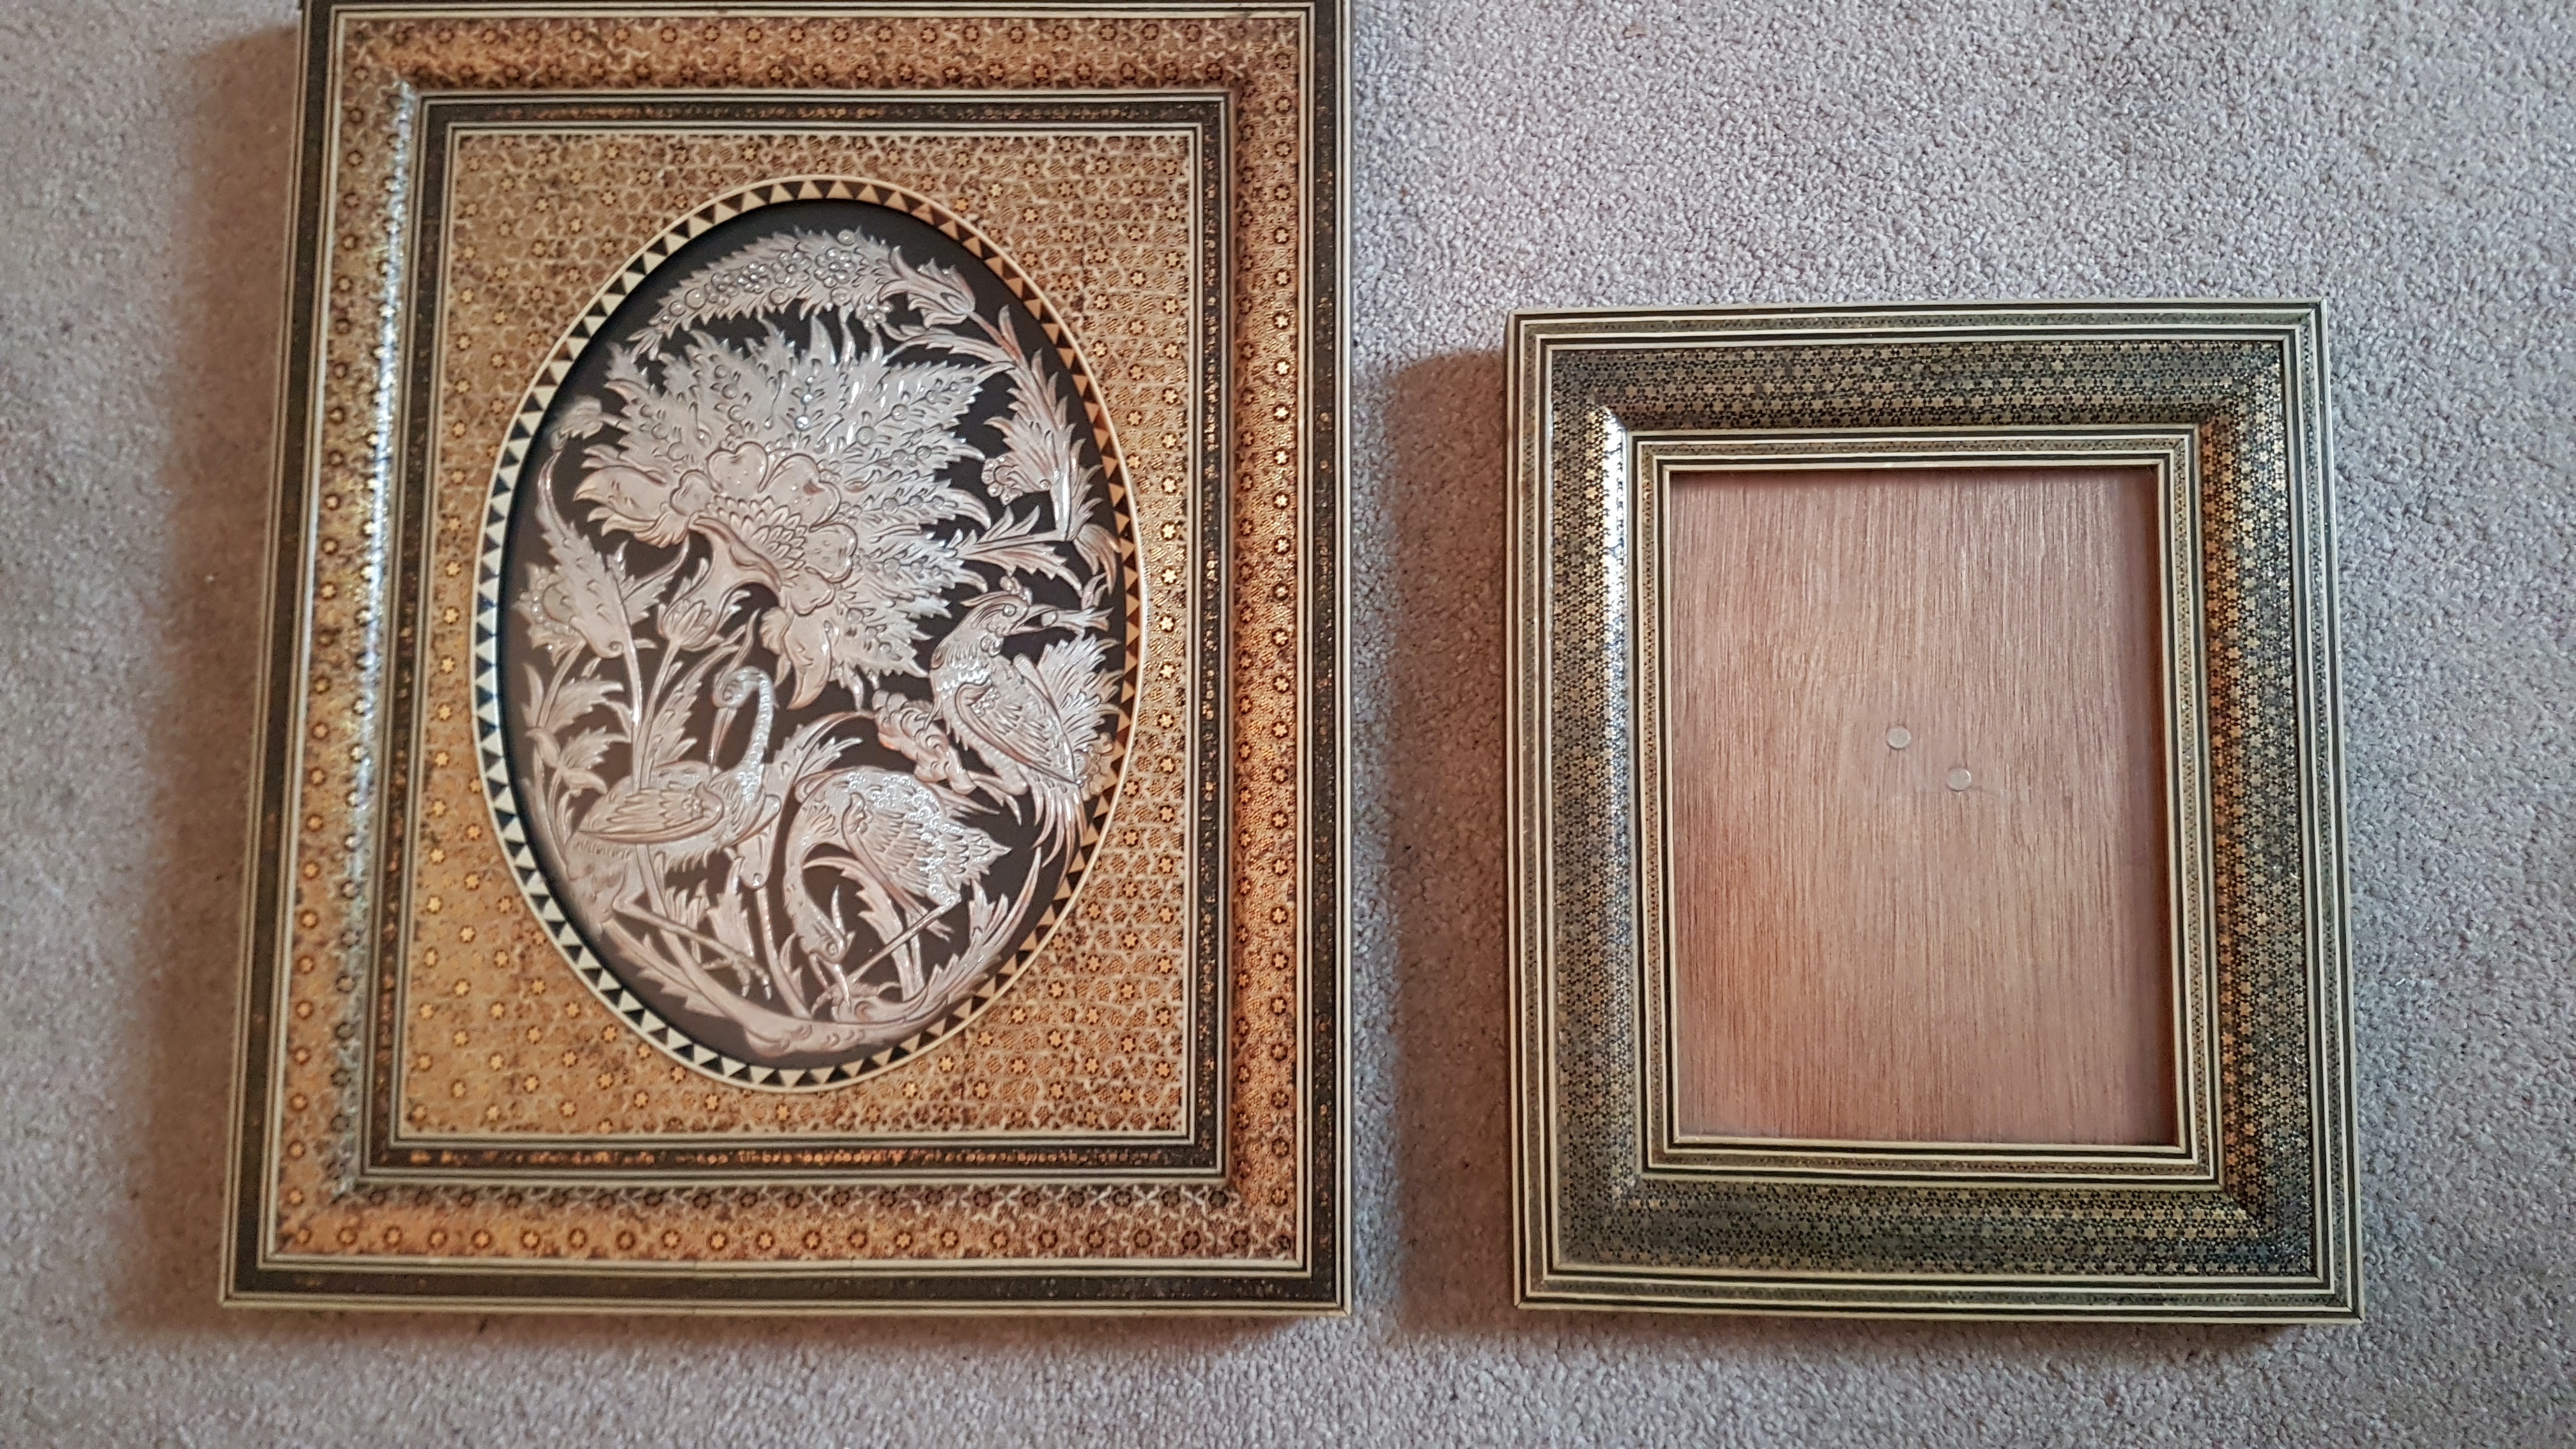 2 Vintage Persian Khatam Marquetry Mosaic Wood Frames, 1 W/Silver Birds In Relief